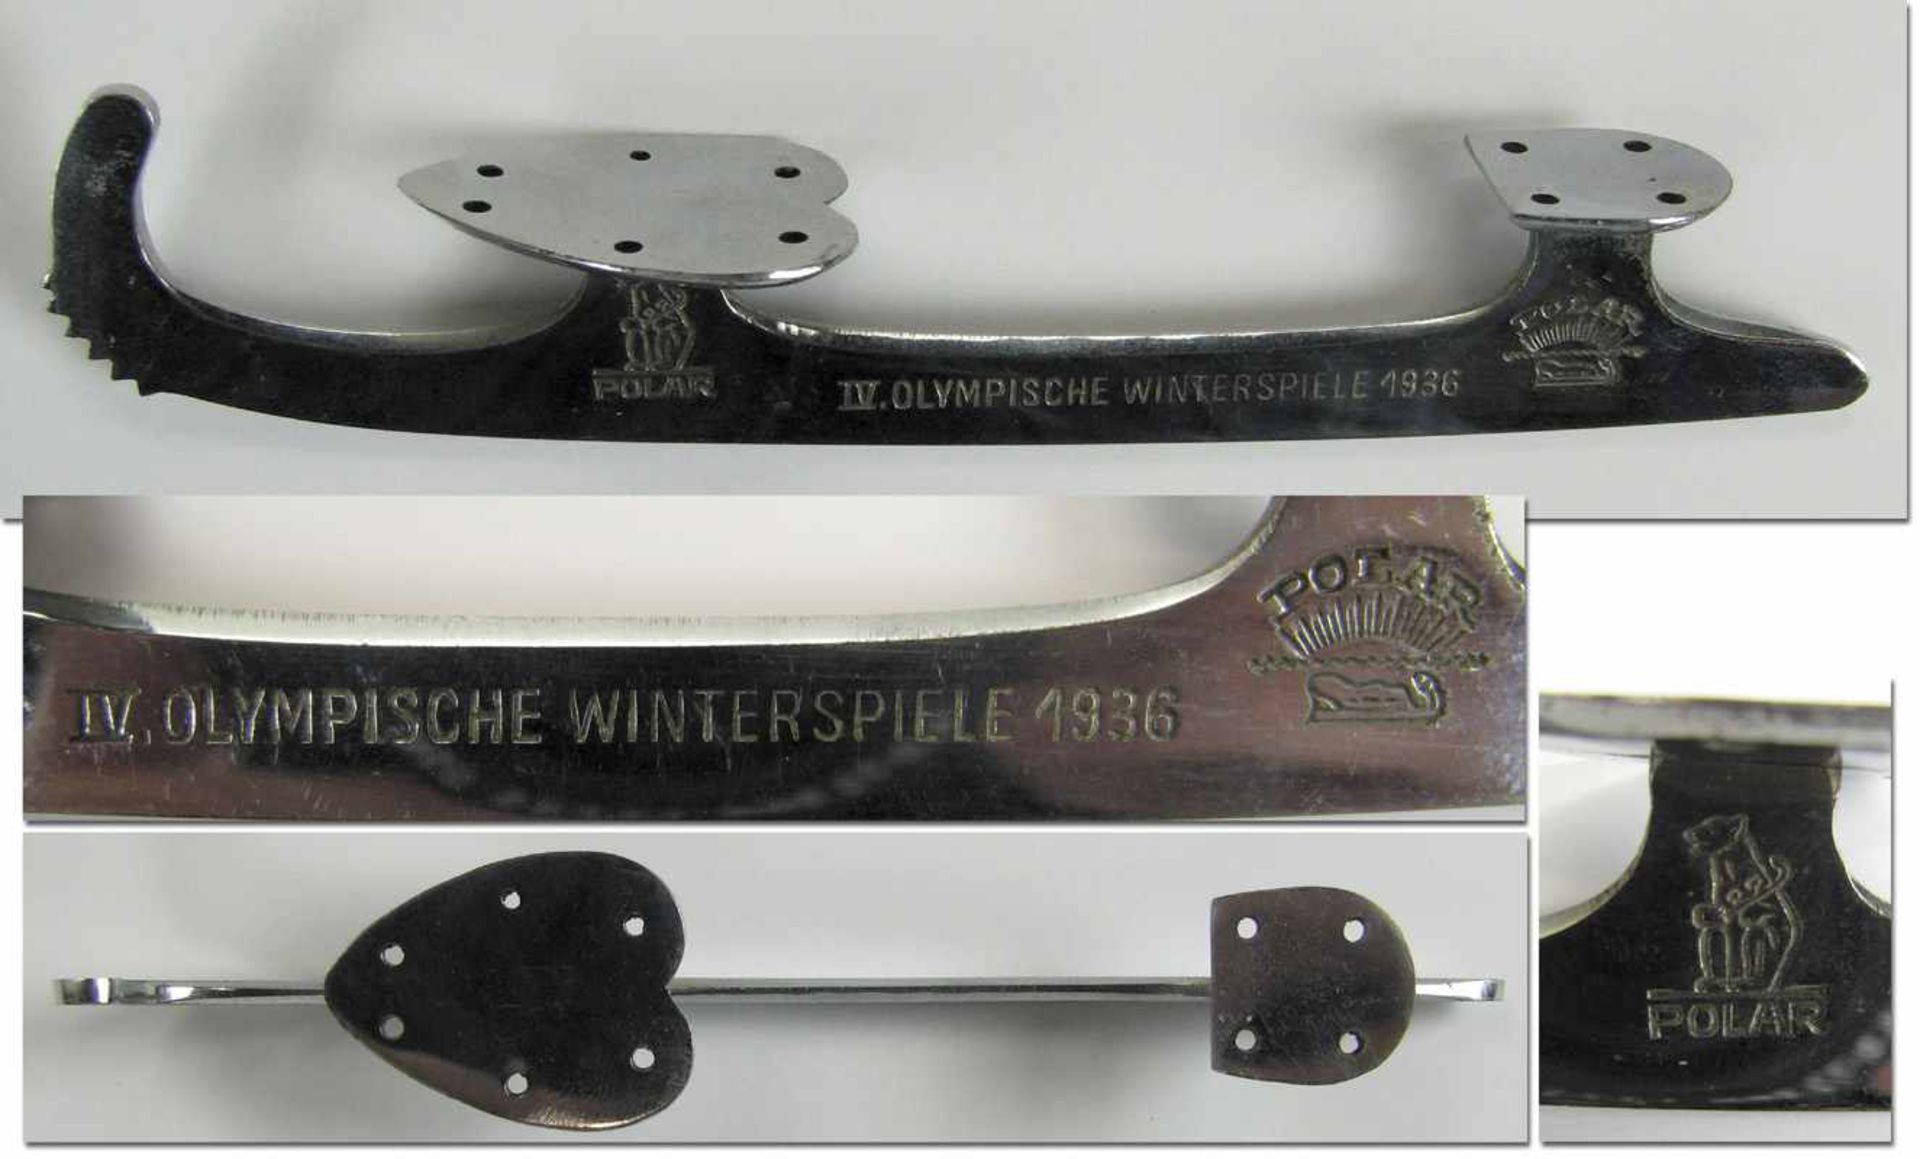 Olympic Winter Games 1936 Mini scating shoes - Minature skate mady by Polar, engraved "IV.Olympische